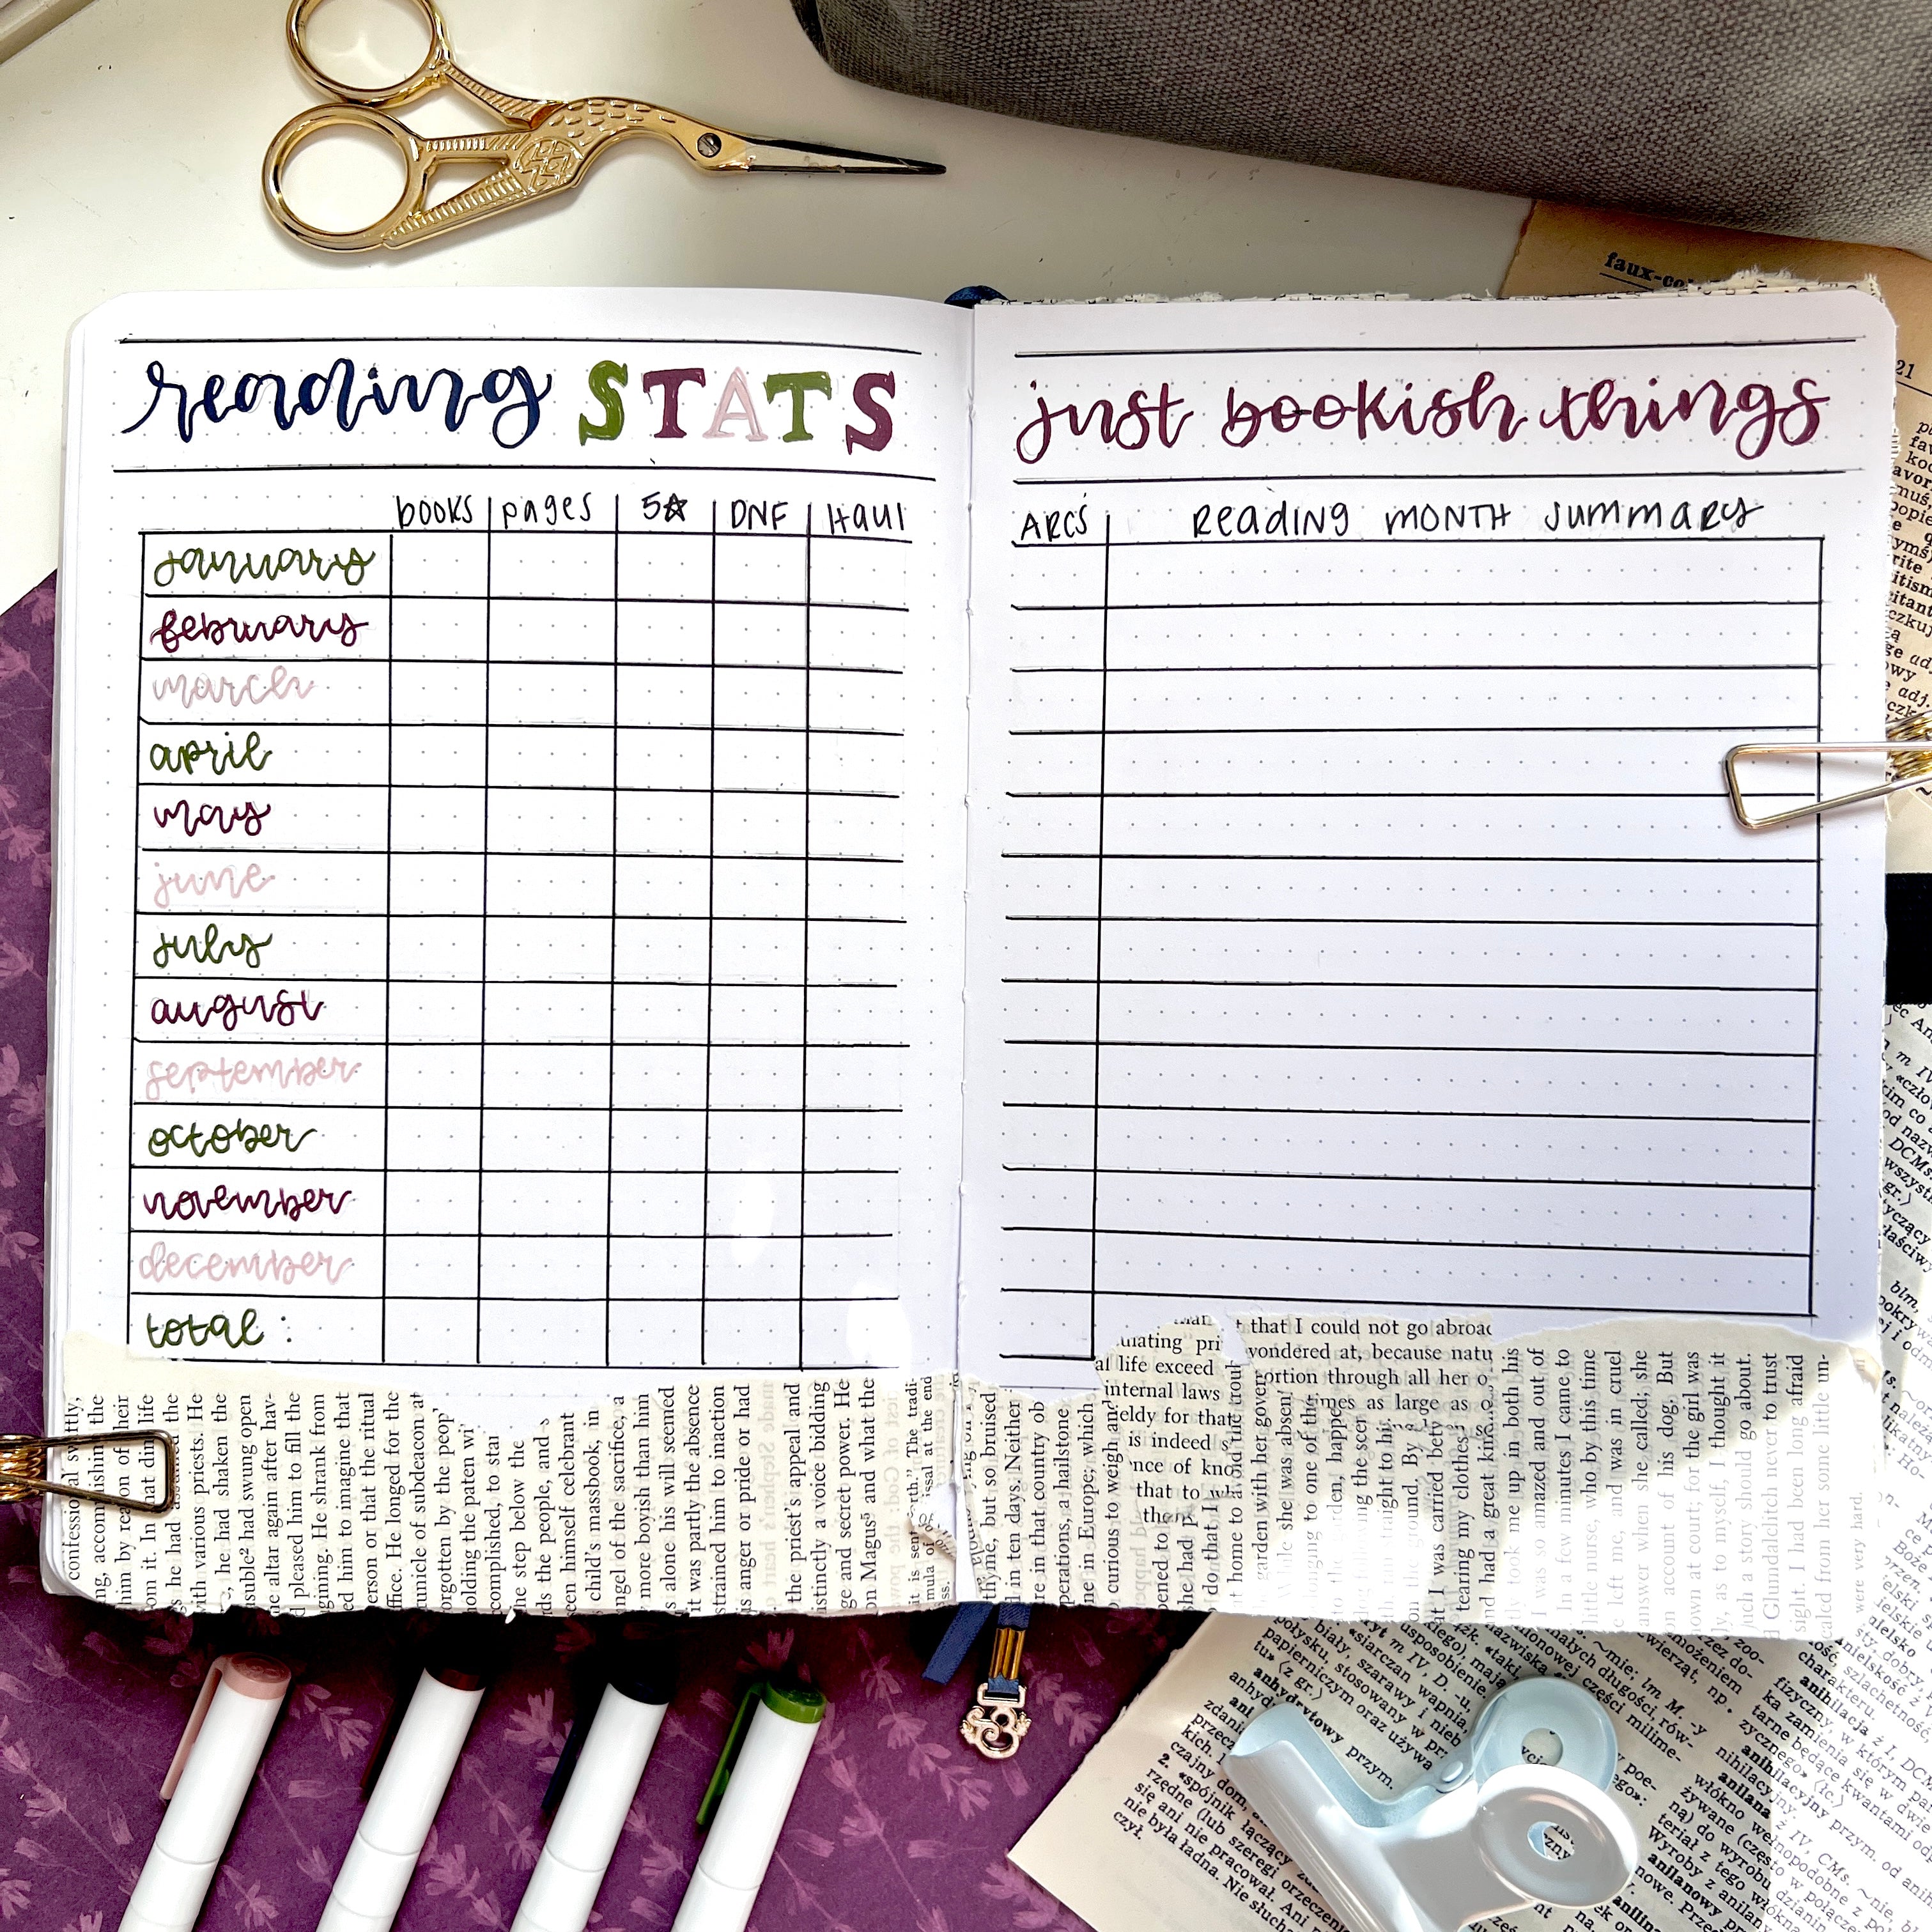 11 Best Bullet Journals for a More Organized and Creative 2024